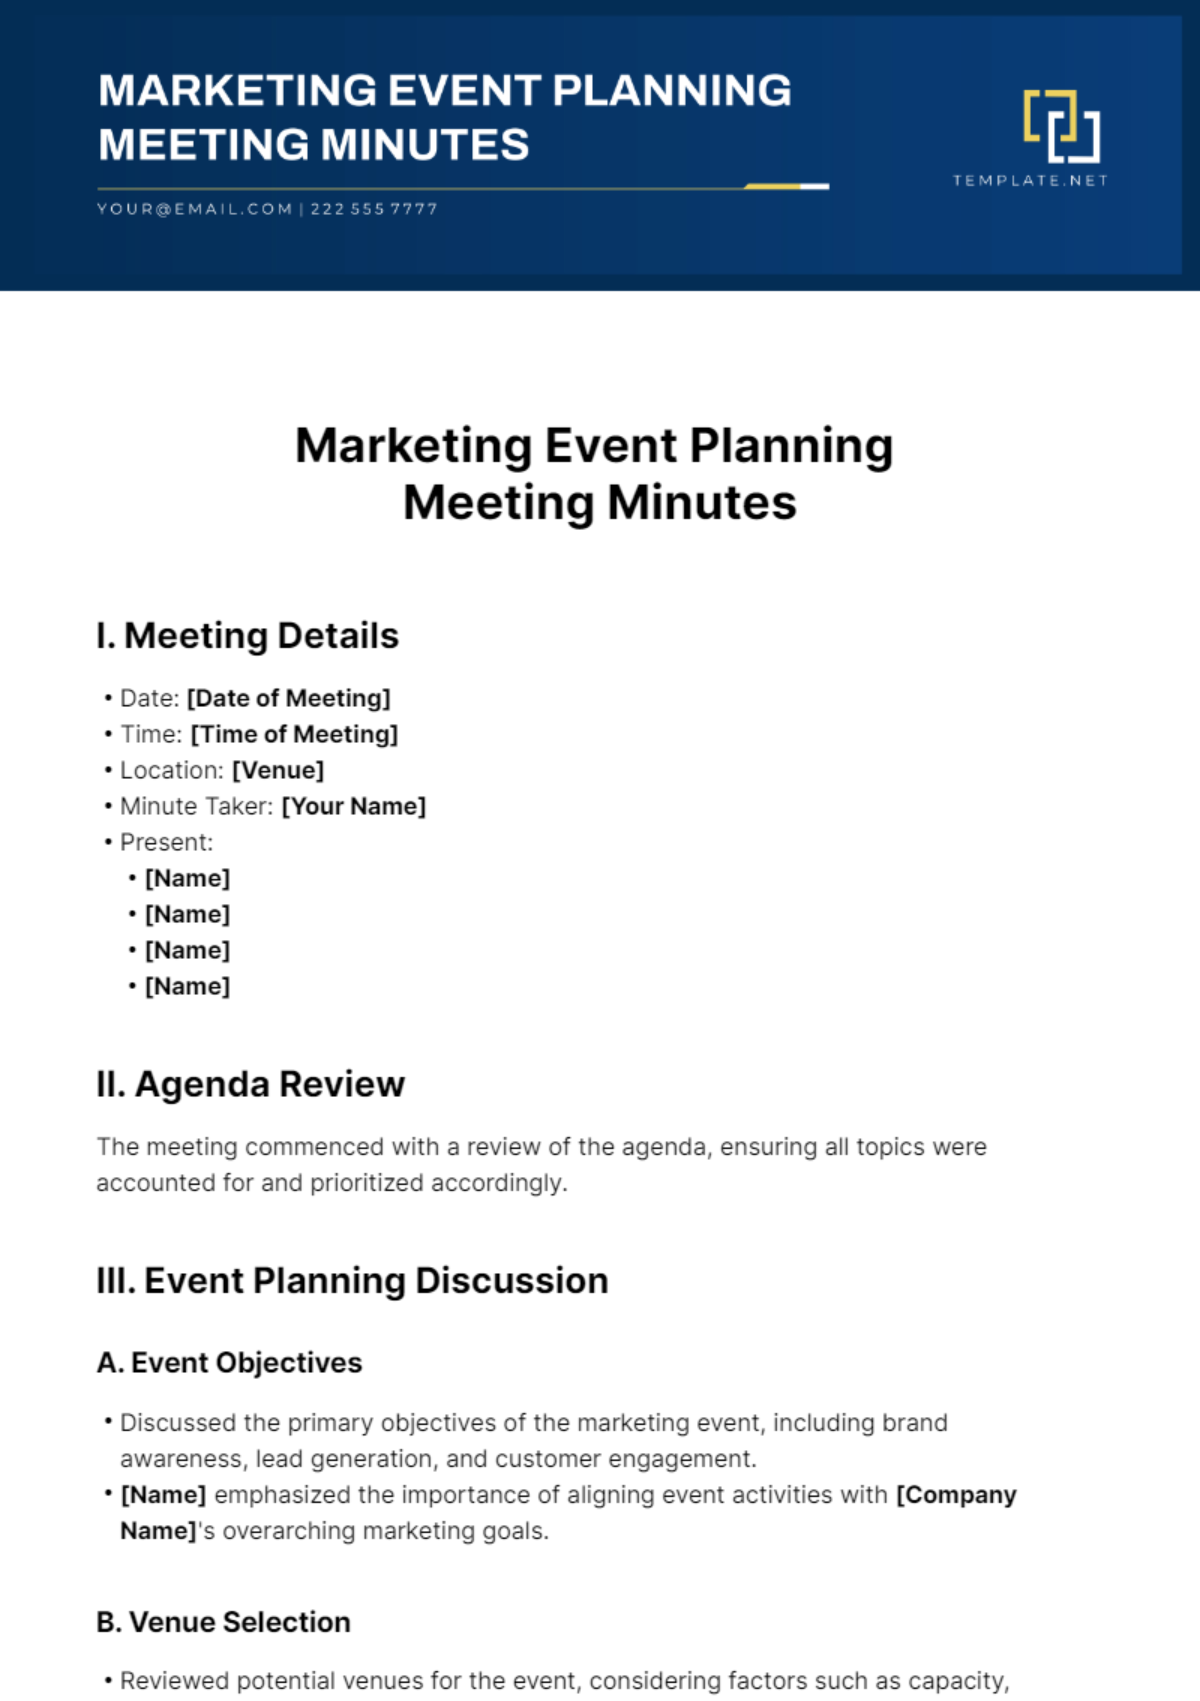 Marketing Event Planning Meeting Minutes Template Edit Online